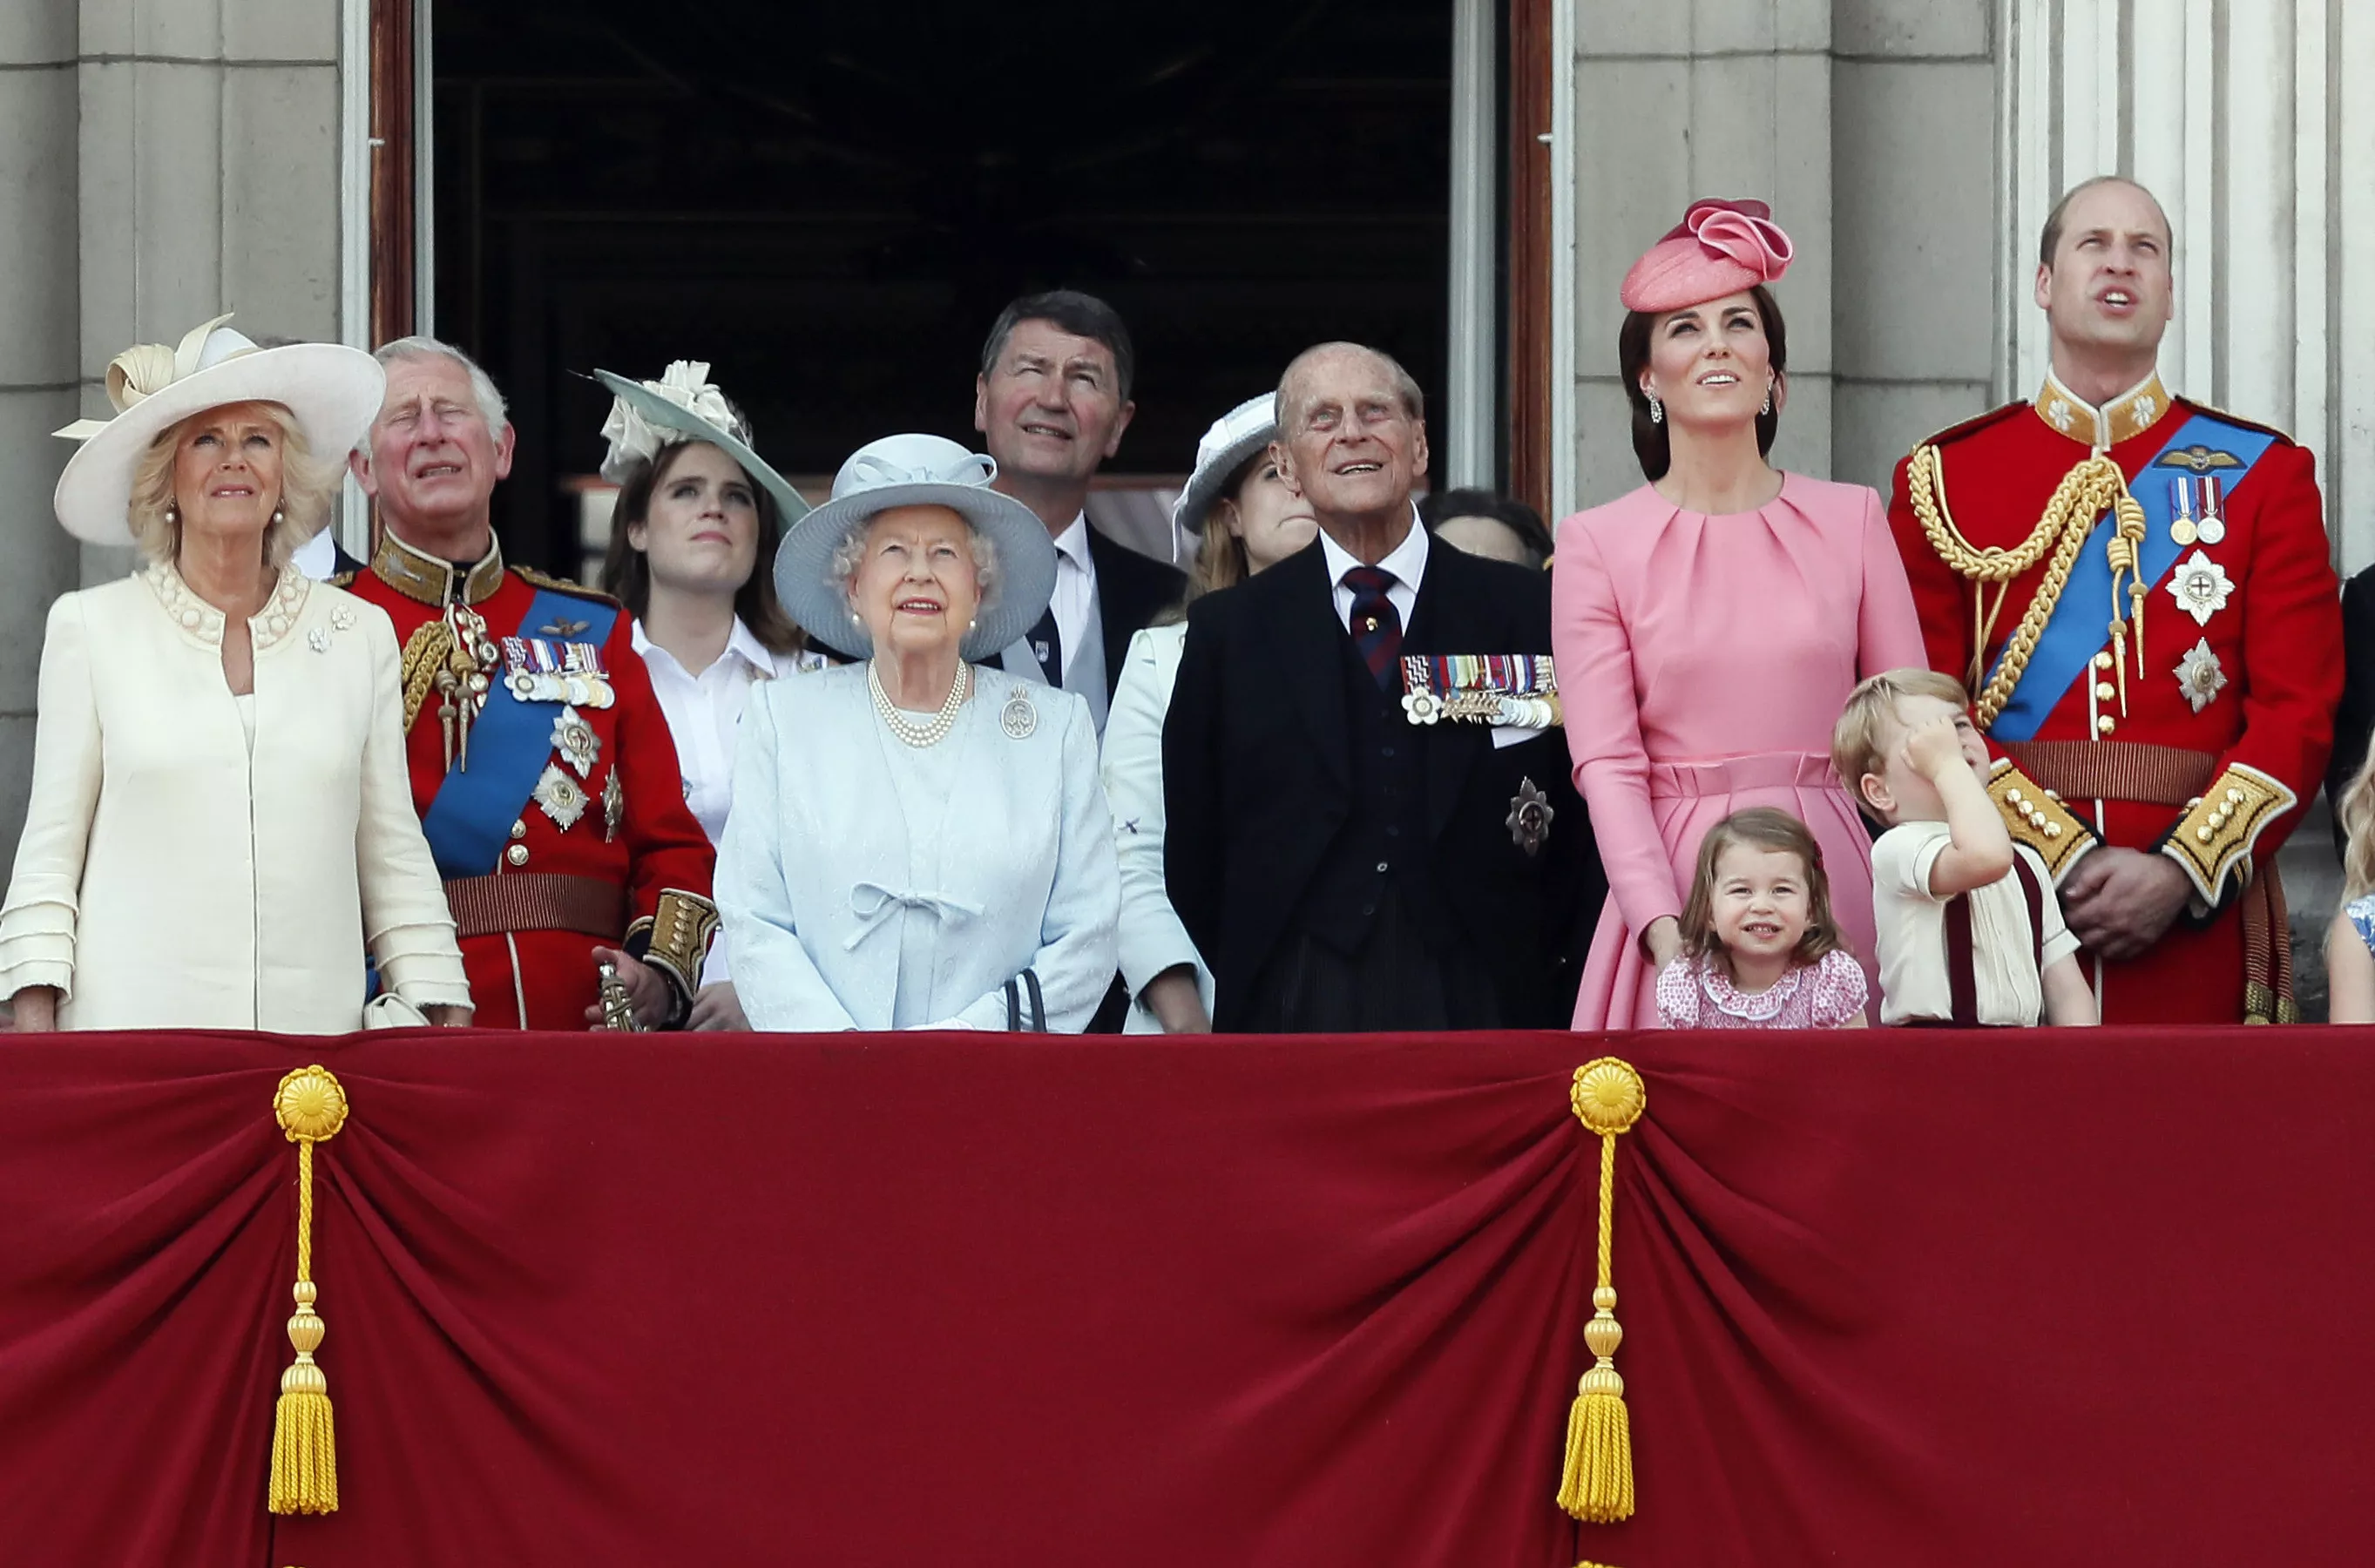 Members of Britain's Royal family from left, Camilla, the Duchess of Cornwall, Prince Charles, Princess Eugenie, Queen Elizabeth II, background Timothy Laurence, Princess Beatrice, Prince Philip, Kate, the Duchess of Cambridge, Princess Charlotte, Prince George and Prince William watch a fly past as they appear on the balcony of Buckingham Palace, after attending the annual Trooping the Colour Ceremony in London, Saturday, June 17, 2017